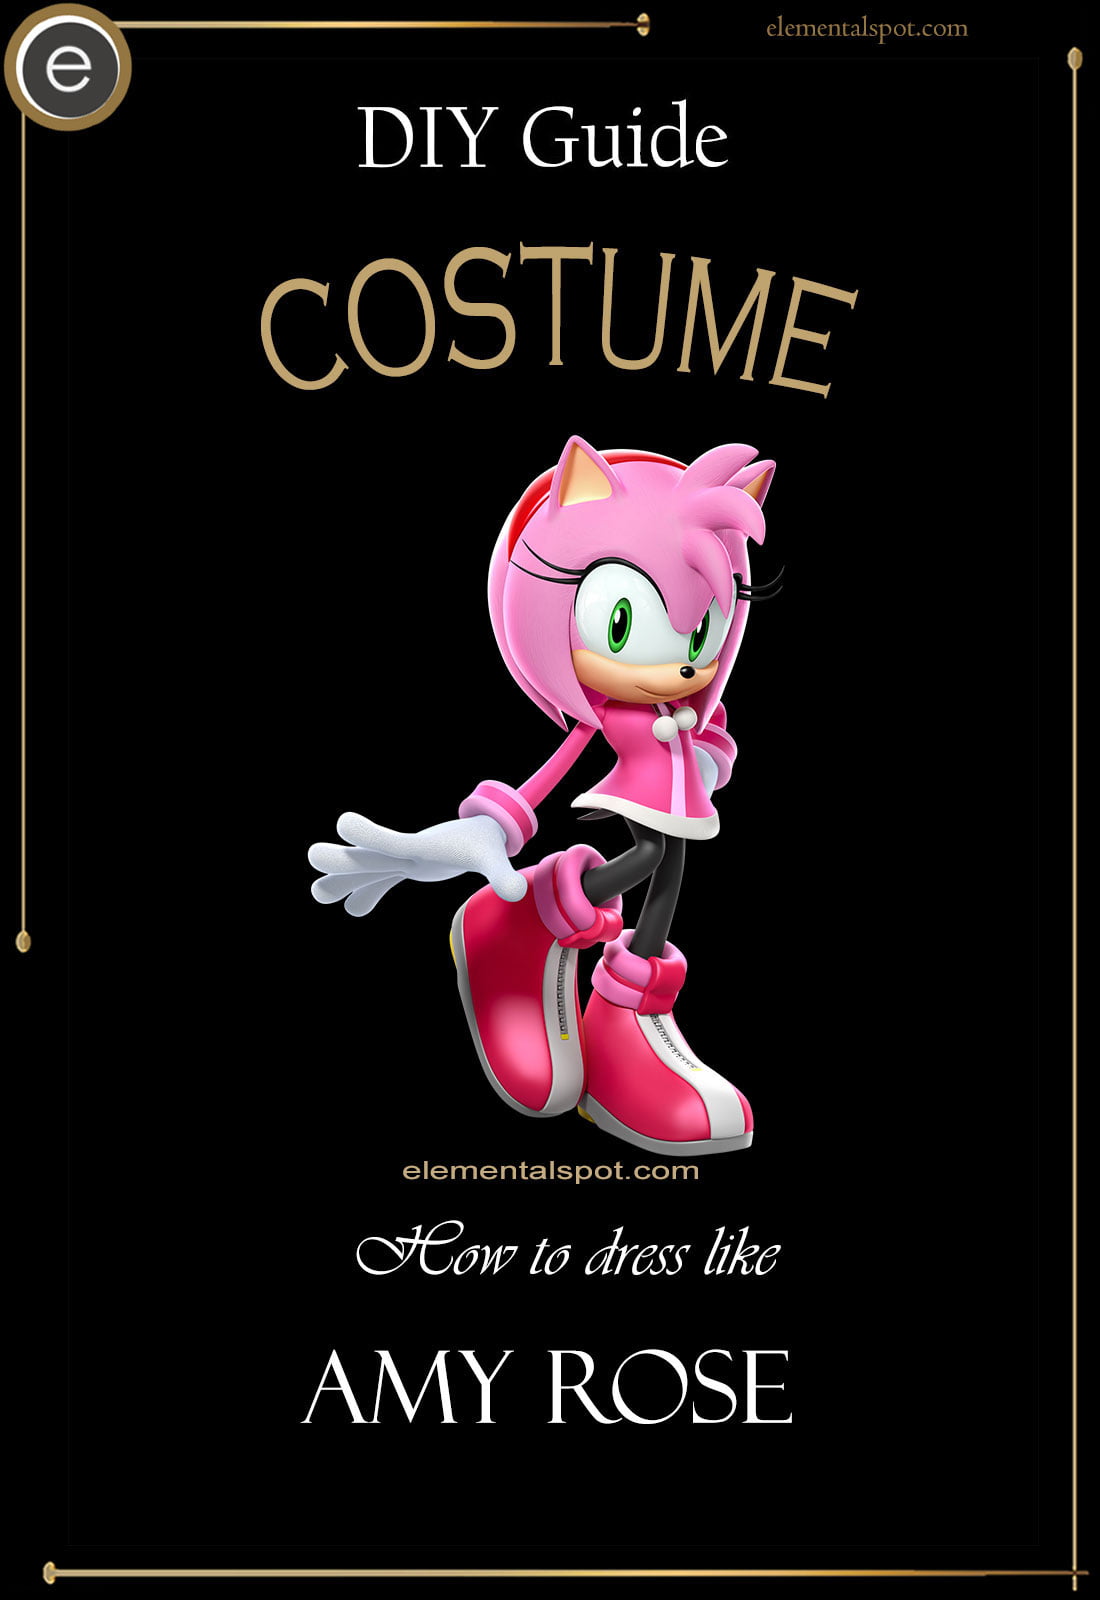 amy rose cosplay - Google Search  Amy rose, Sonic costume, Cute